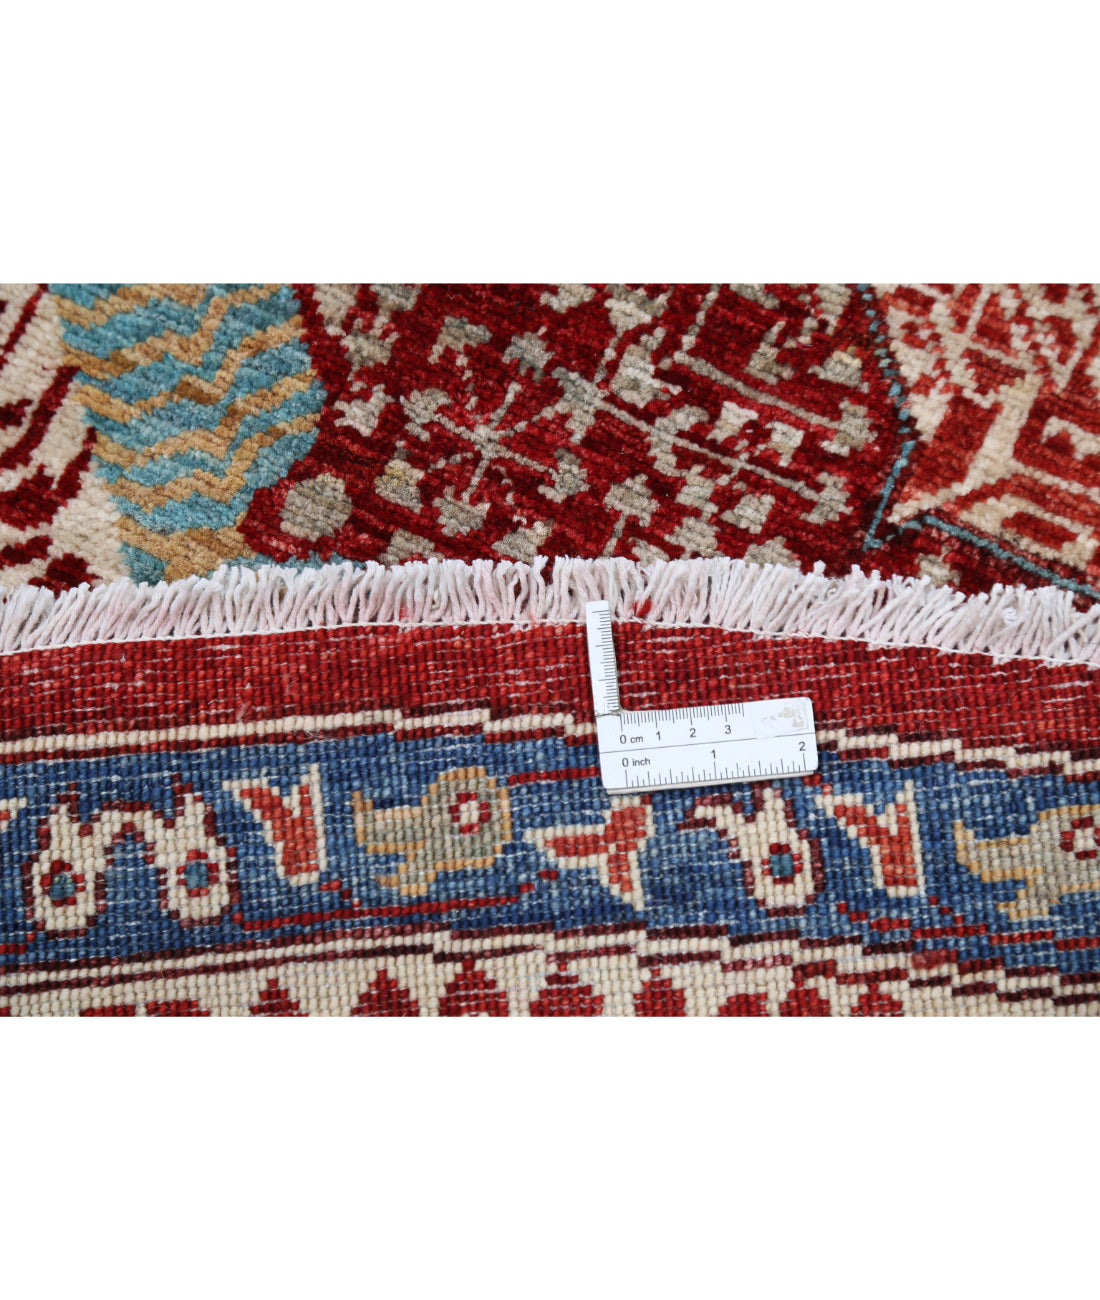 Hand Knotted Mamluk Wool Rug - 7'10'' x 7'11'' 7'10'' x 7'11'' (235 X 238) / Red / Ivory